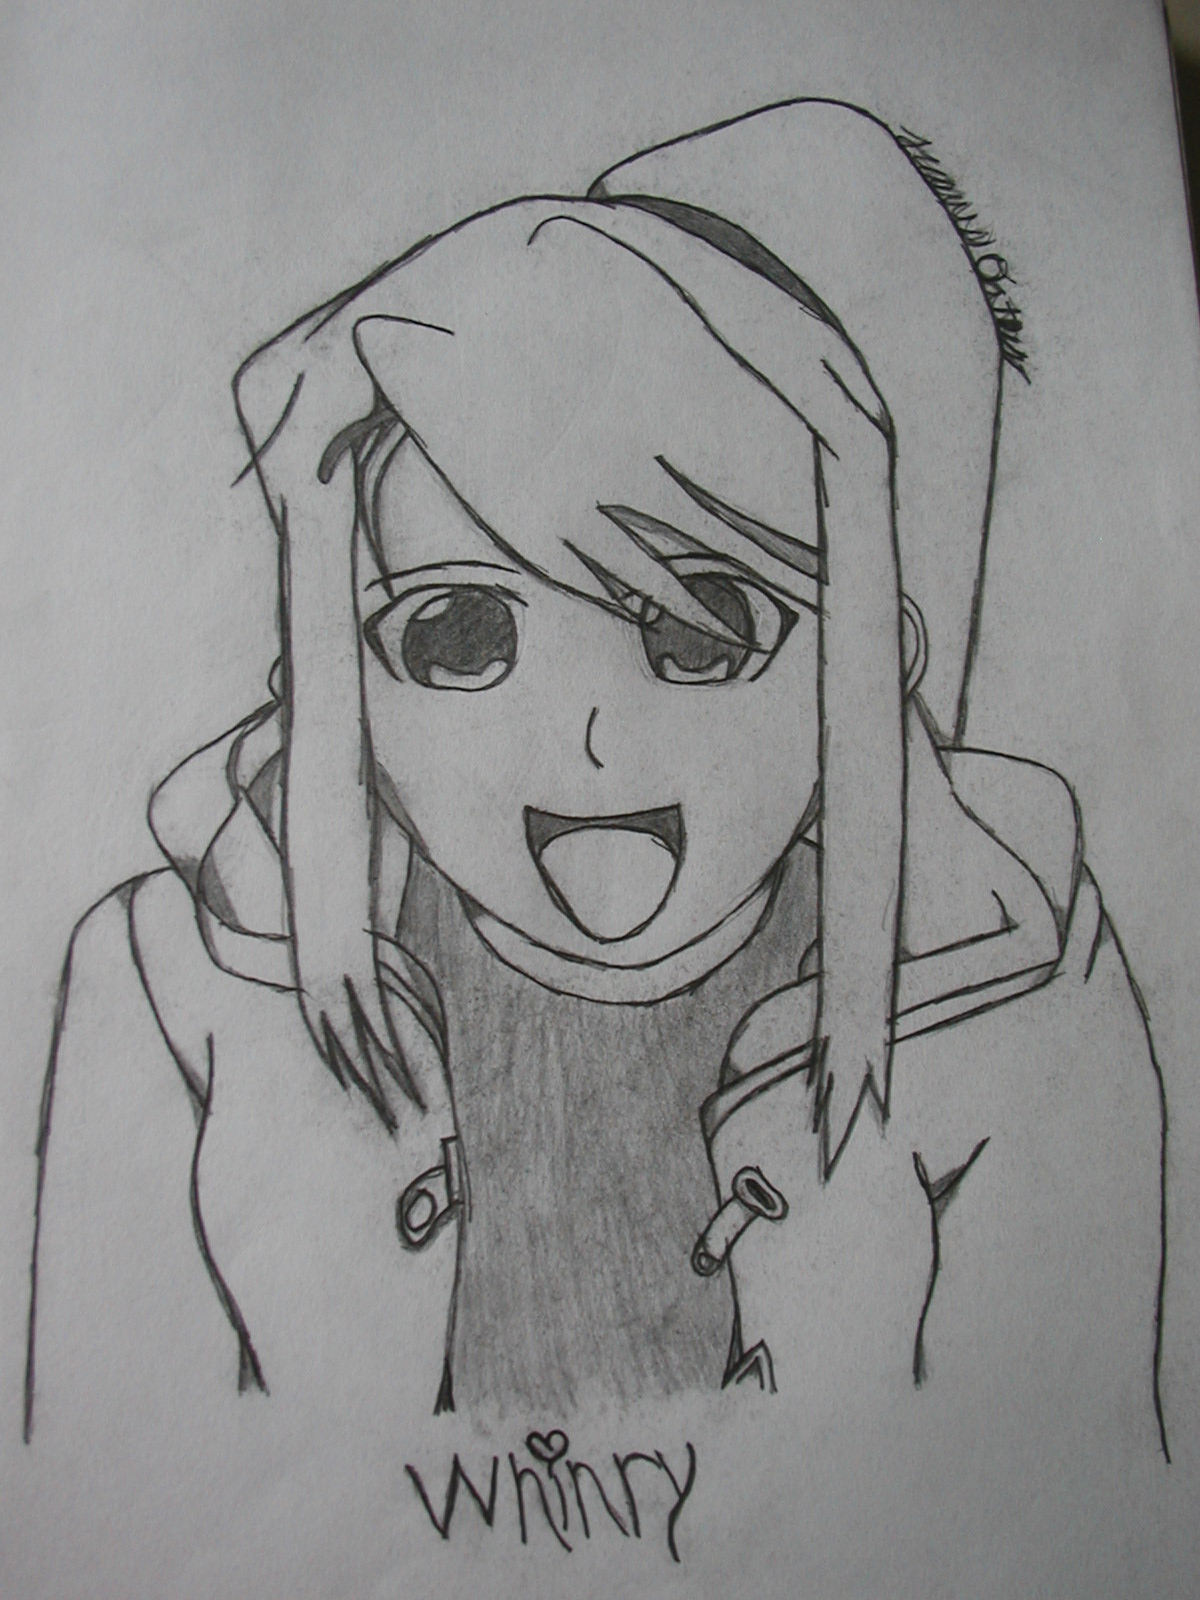 Winry by inuyashas1friend